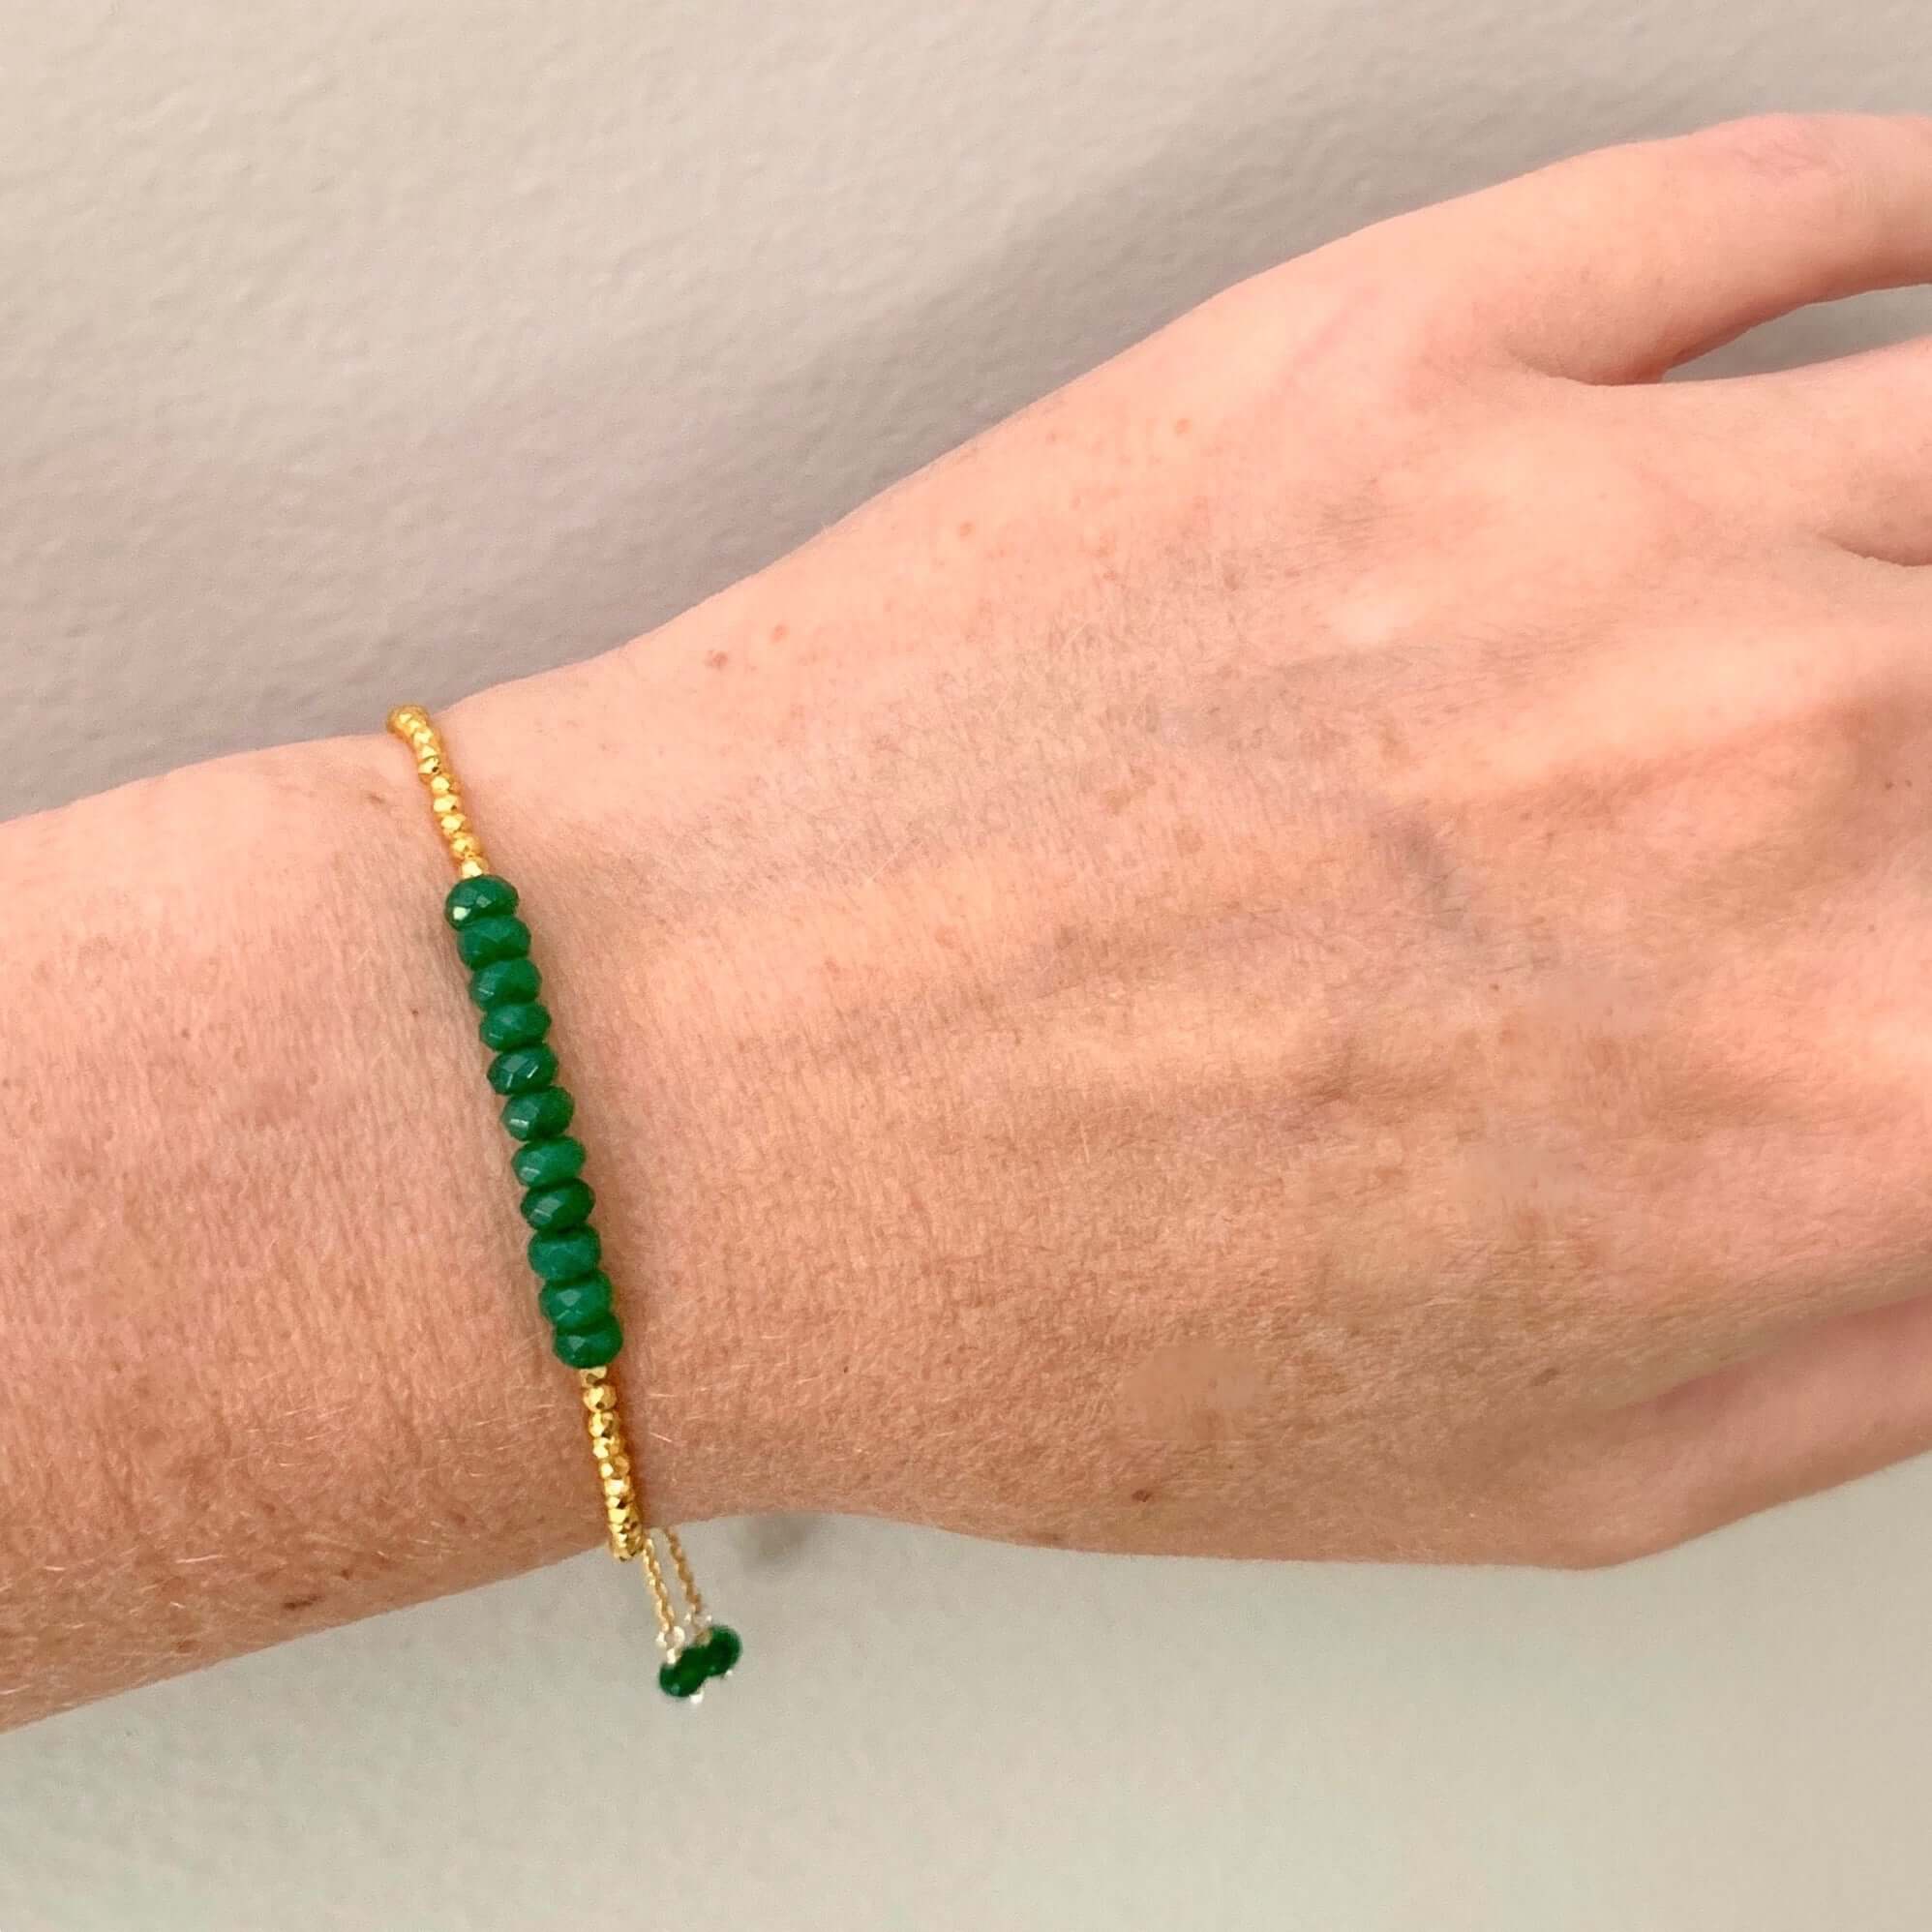 Gold-Plated Chain Bracelets Adorned with Authentic Green Jade Stones